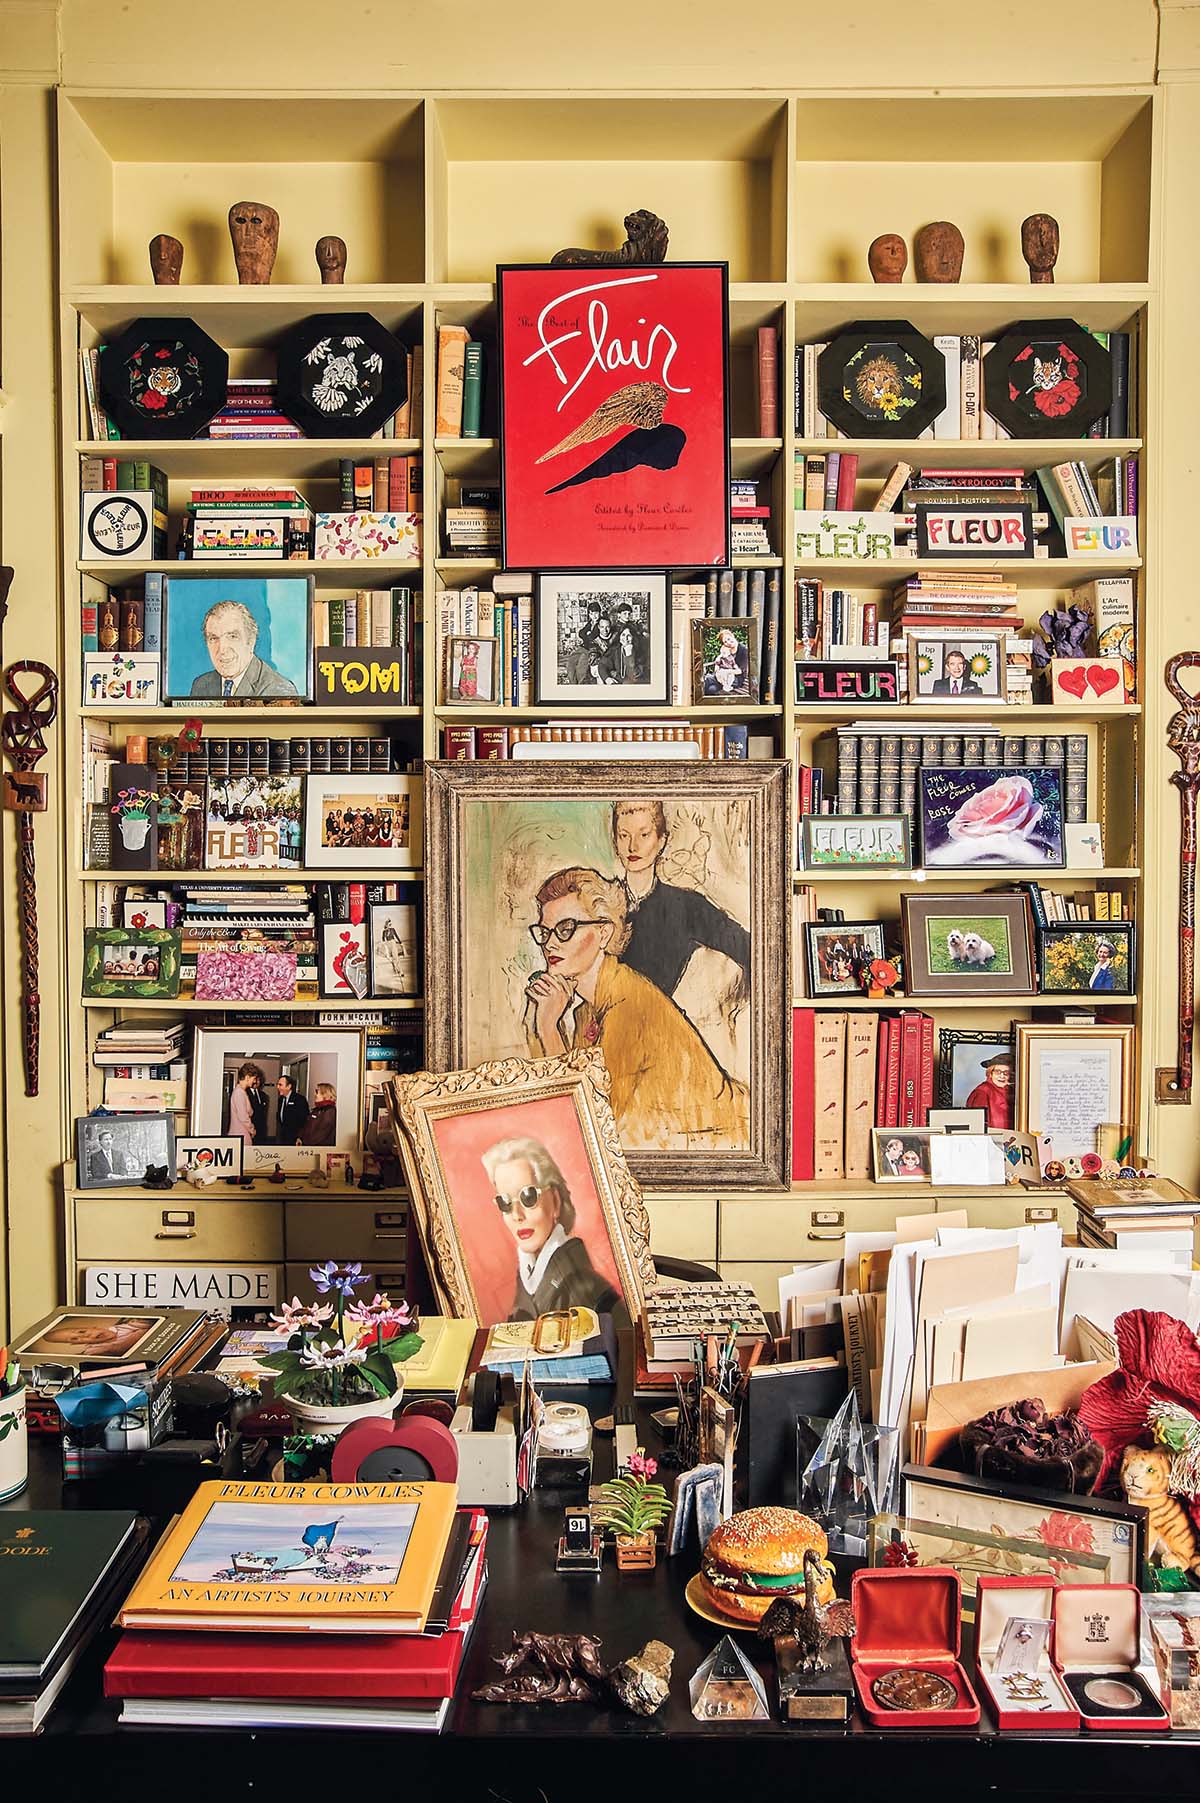 A bookshelf wall filled with records, books and art.